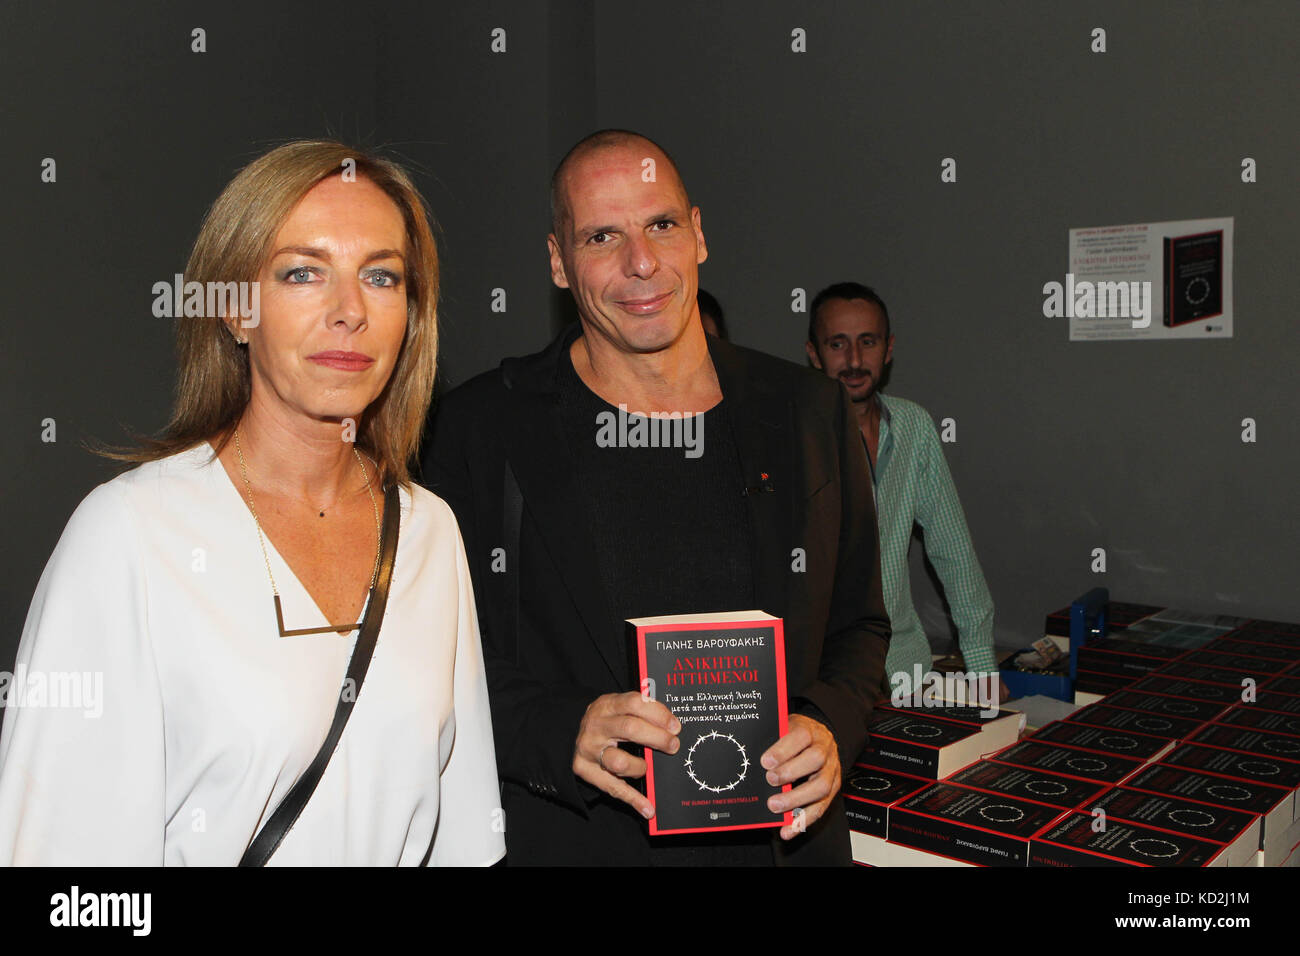 Athens, Greece. 9th Oct, 2017. Former Greek Finance Minister YANIS VAROUFAKIS presents his new book ''Adults in the room'' in Athens. Yanis Varoufakis with his wife Danae Stratou. Credit: Aristidis Vafeiadakis/ZUMA Wire/Alamy Live News Stock Photo